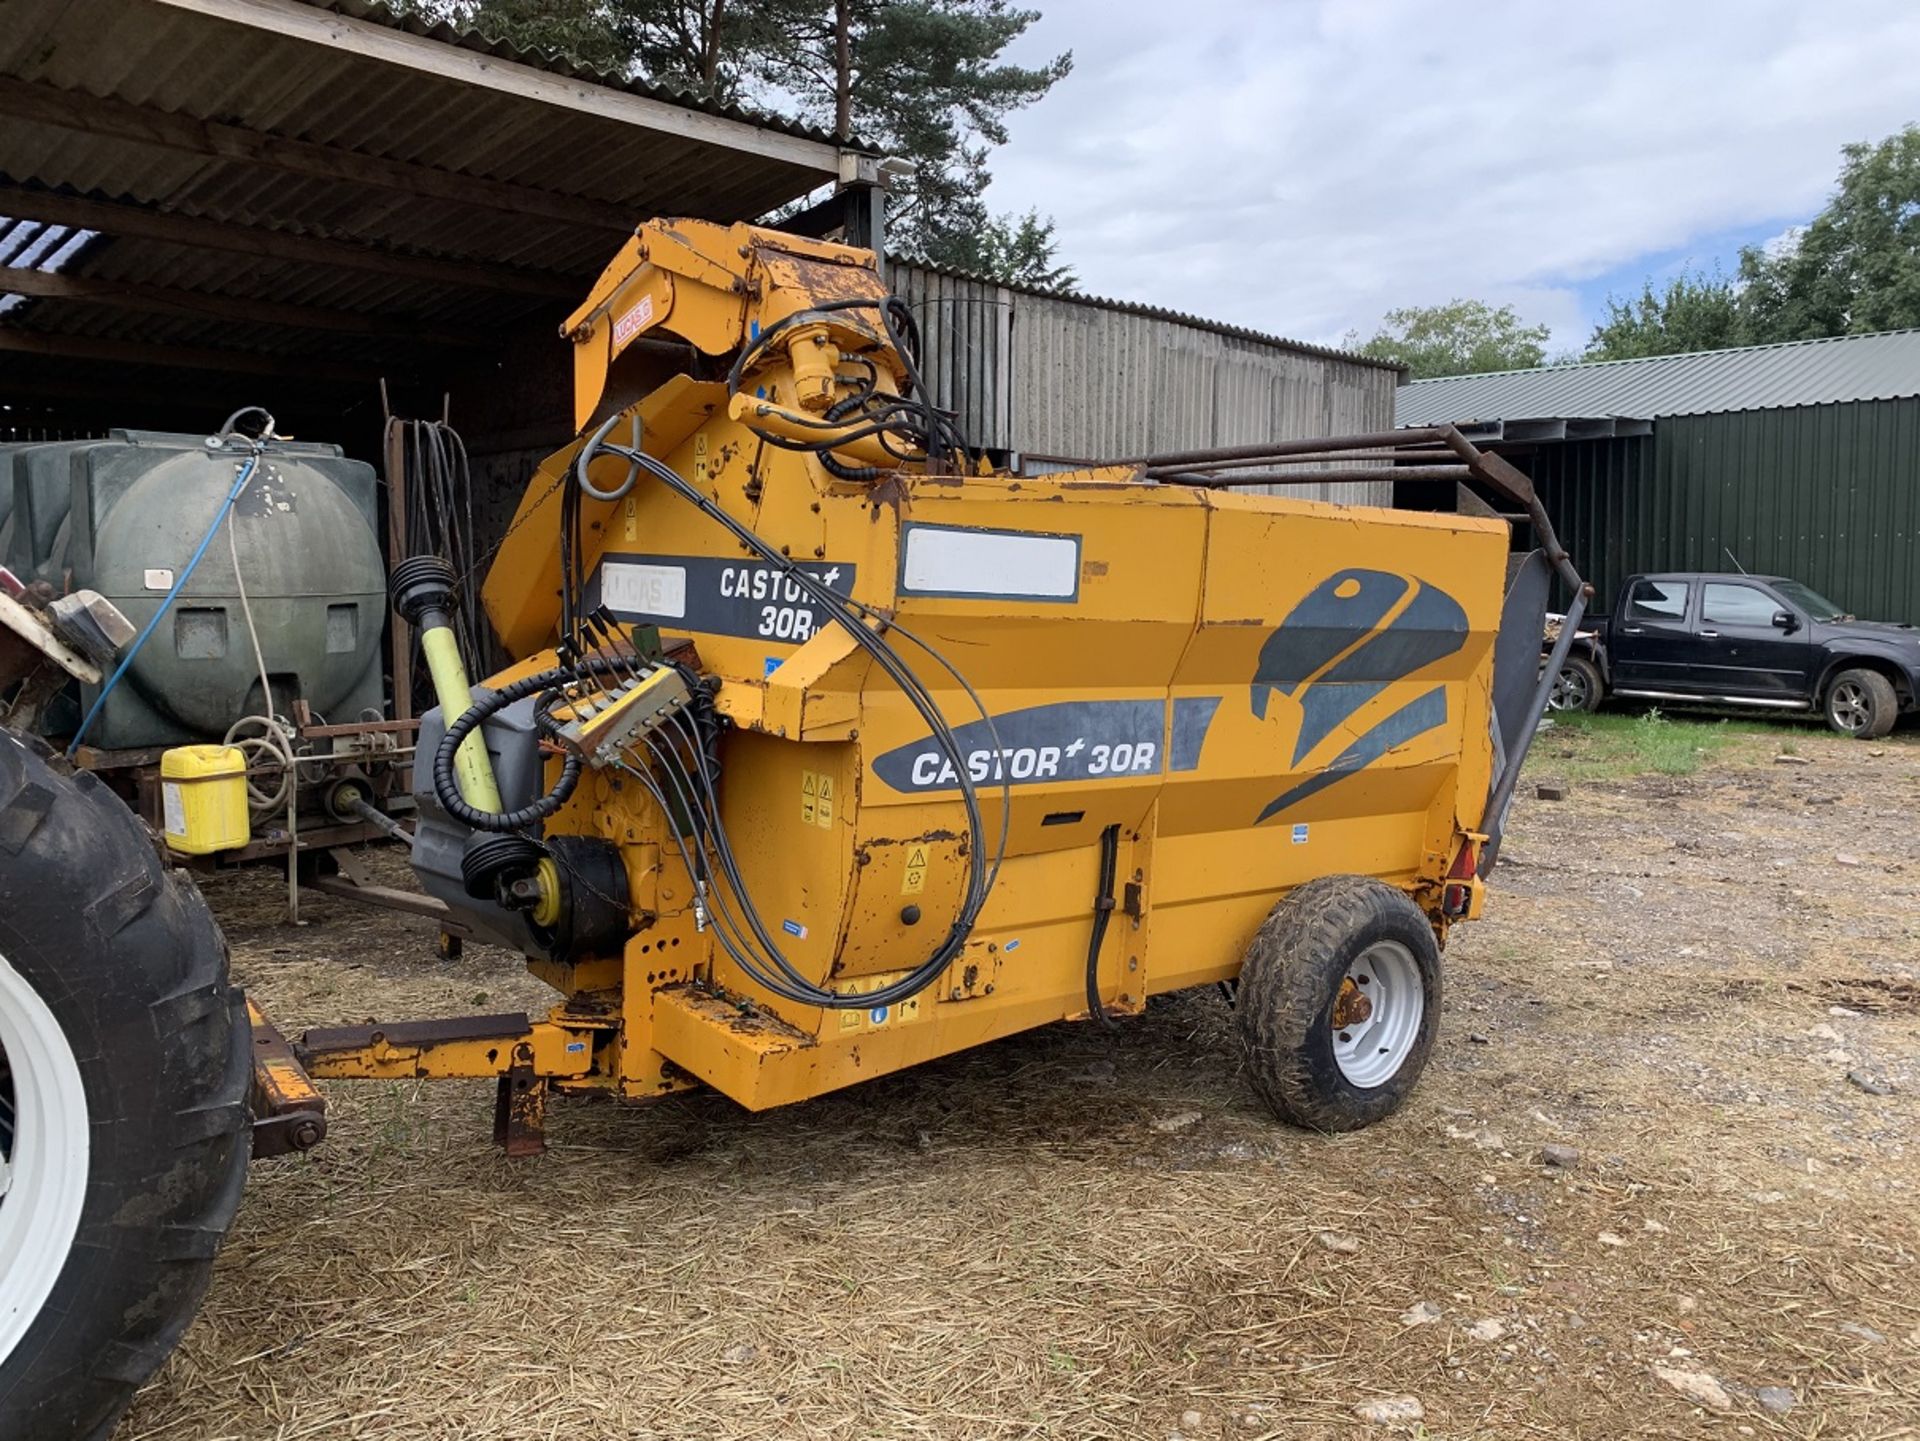 Lucas G Castor 30RUT Straw Chopper Blower Self Loading, Cable controlled Located near Beccles,